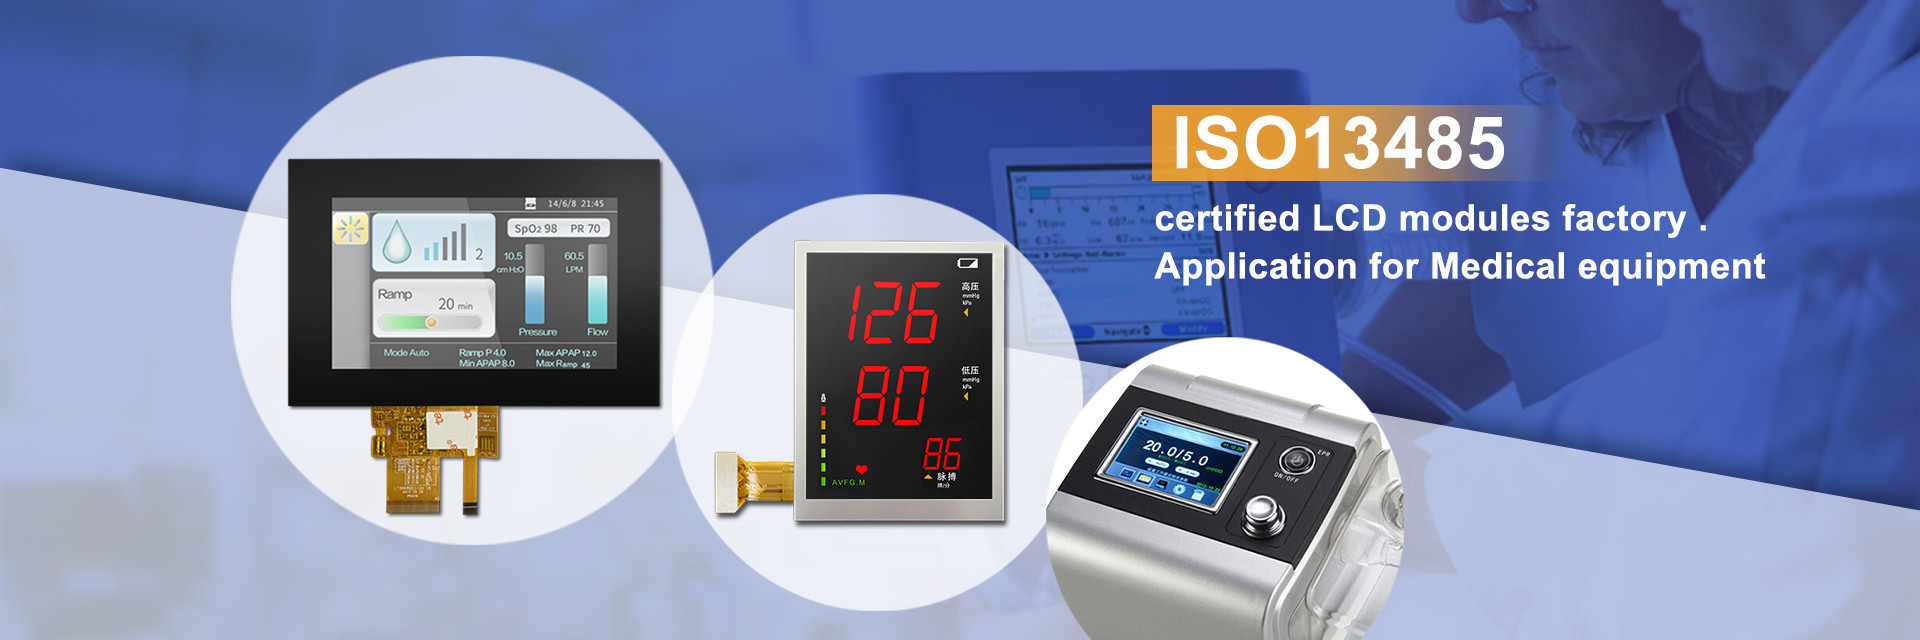 ISO13485 certified LCD moduldes display factory